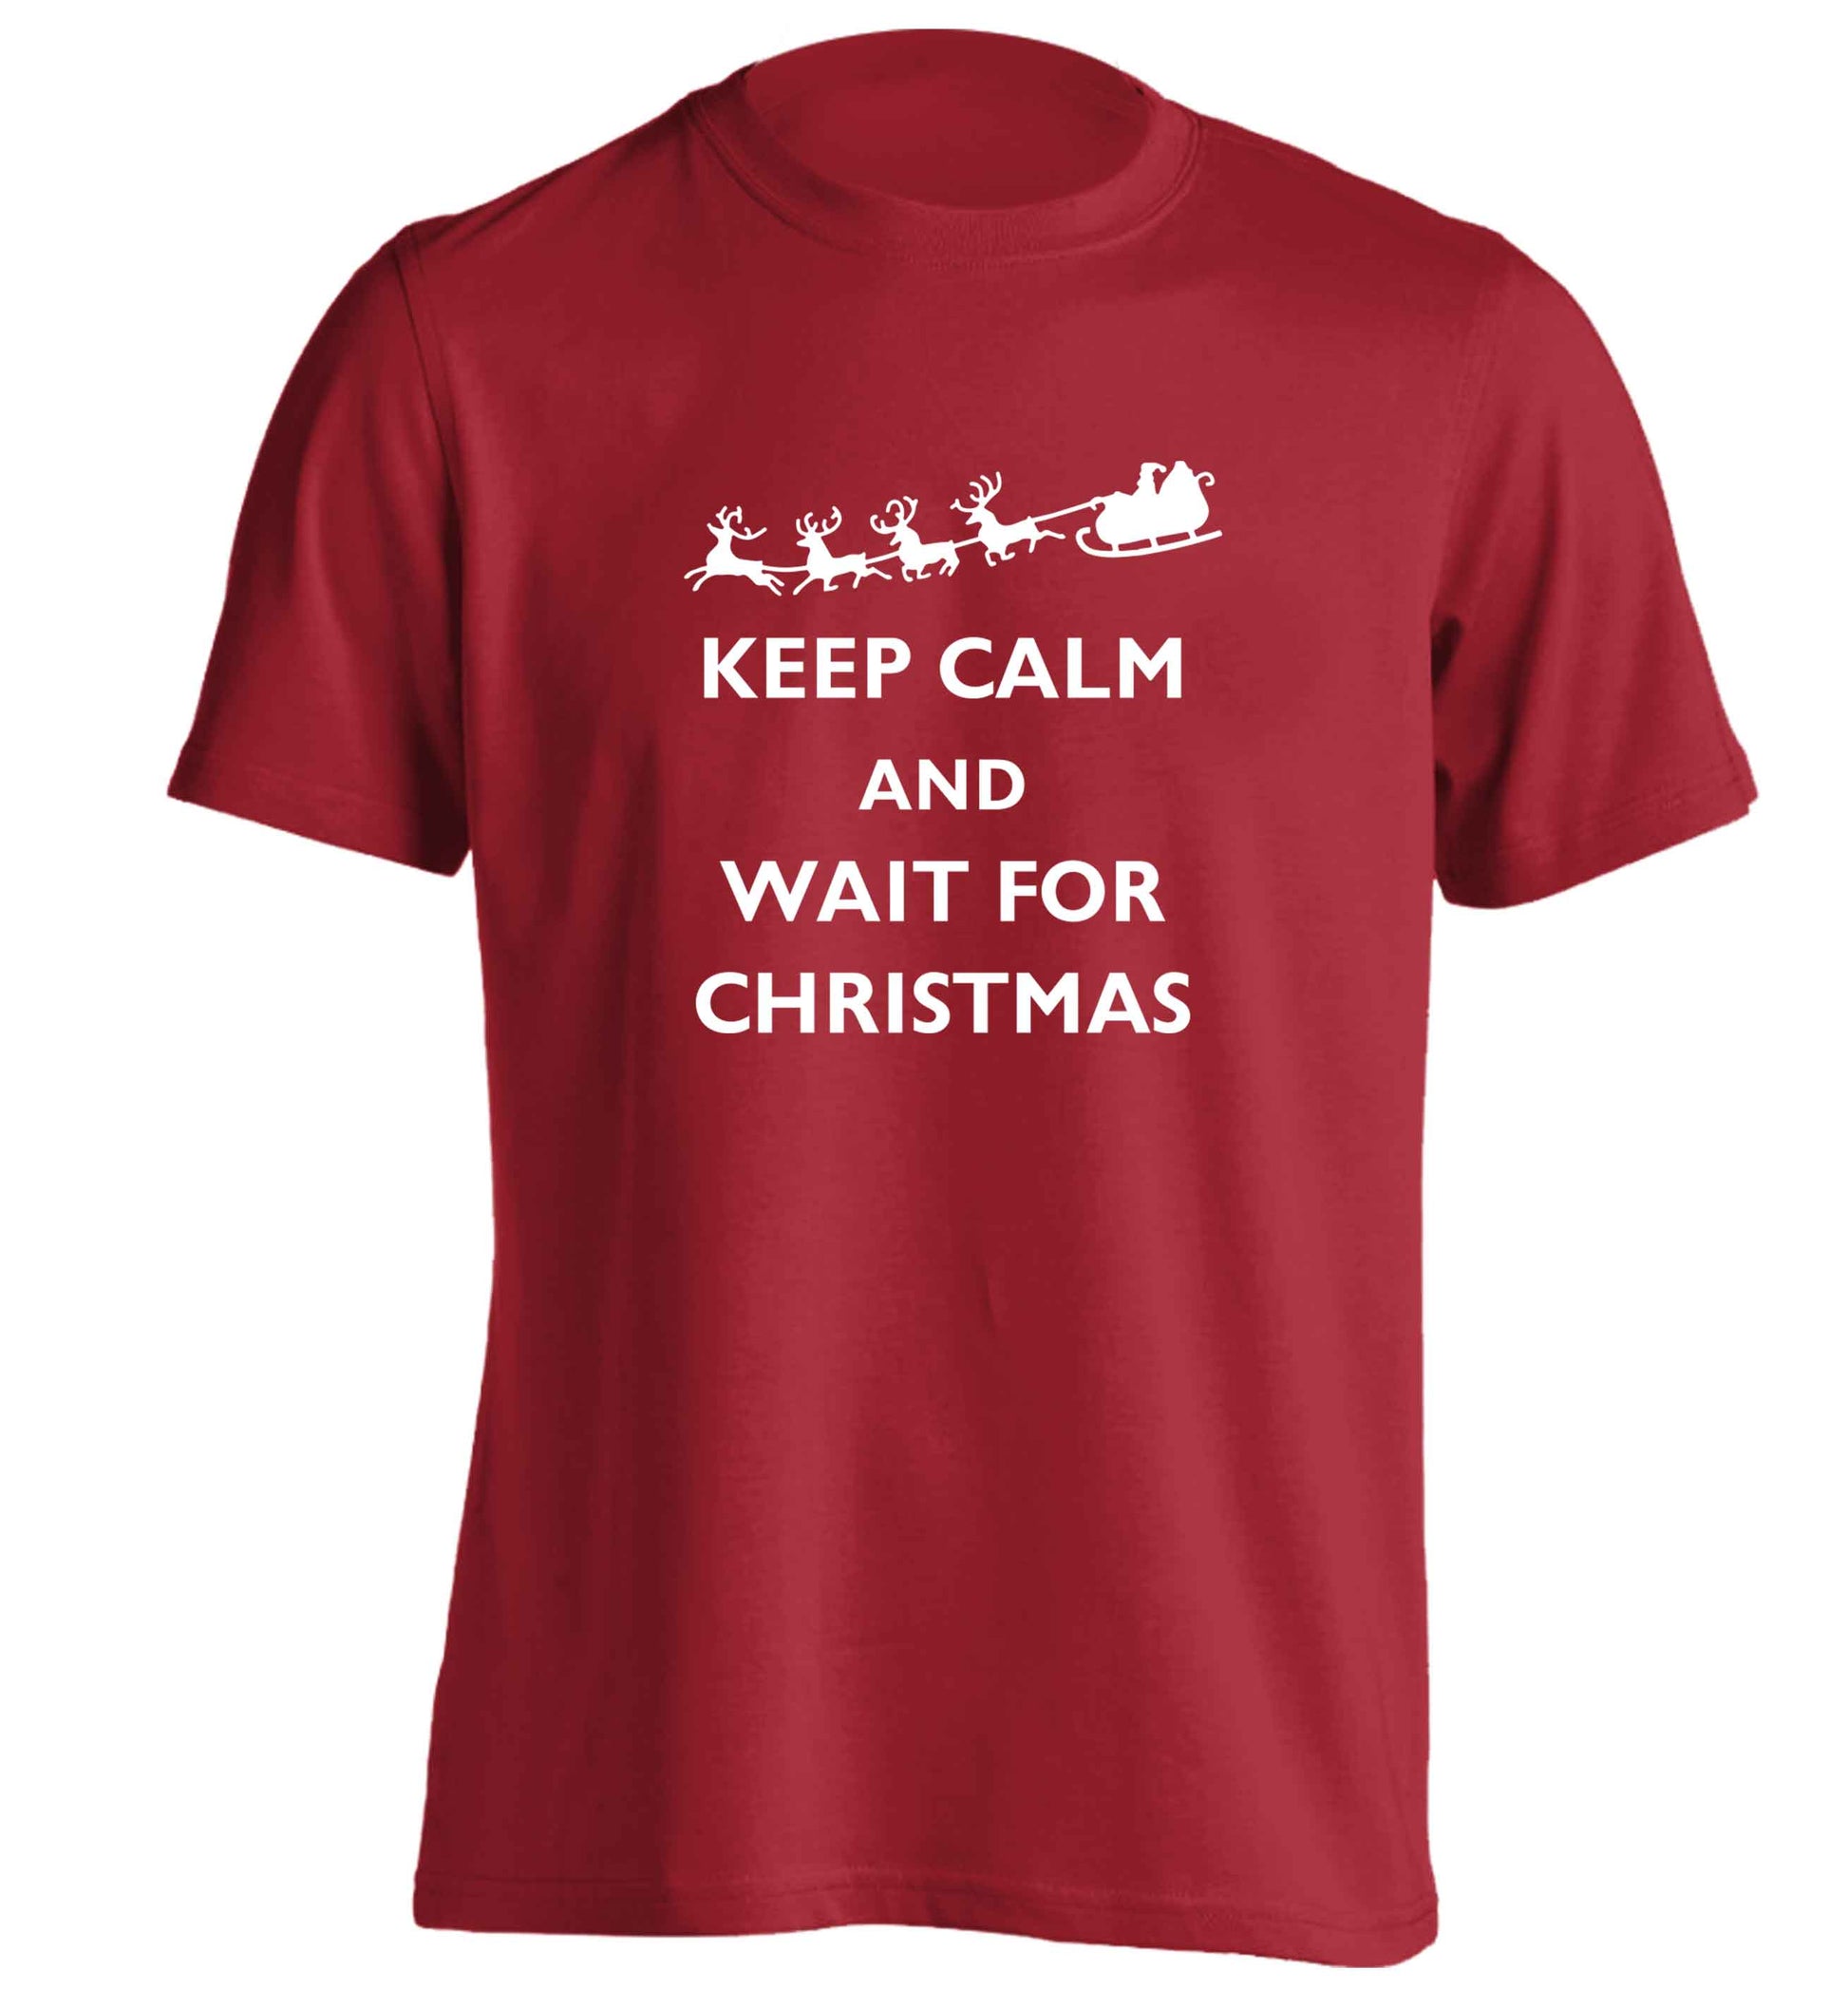 Keep calm and wait for Christmas adults unisex red Tshirt 2XL